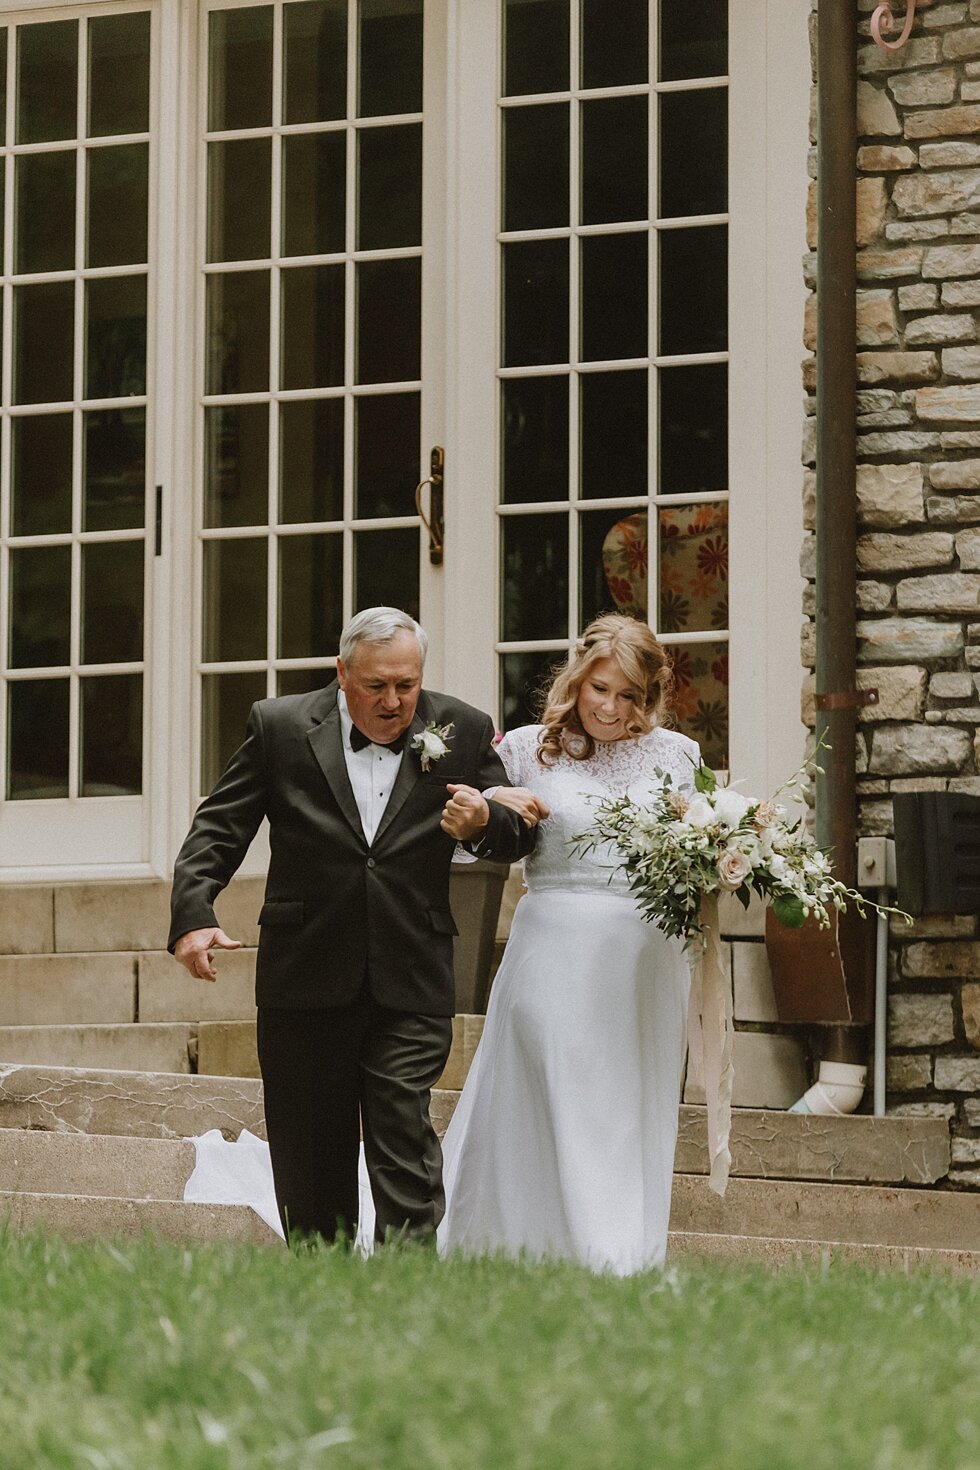  The father of the bride helped his gorgeous daughter down the aisle for her intimate elopement ceremony. elopement goshen crest farm louisville kentucky elopement photographer simplistic sweet intimate stunning backyard farm wedding #springweddingda